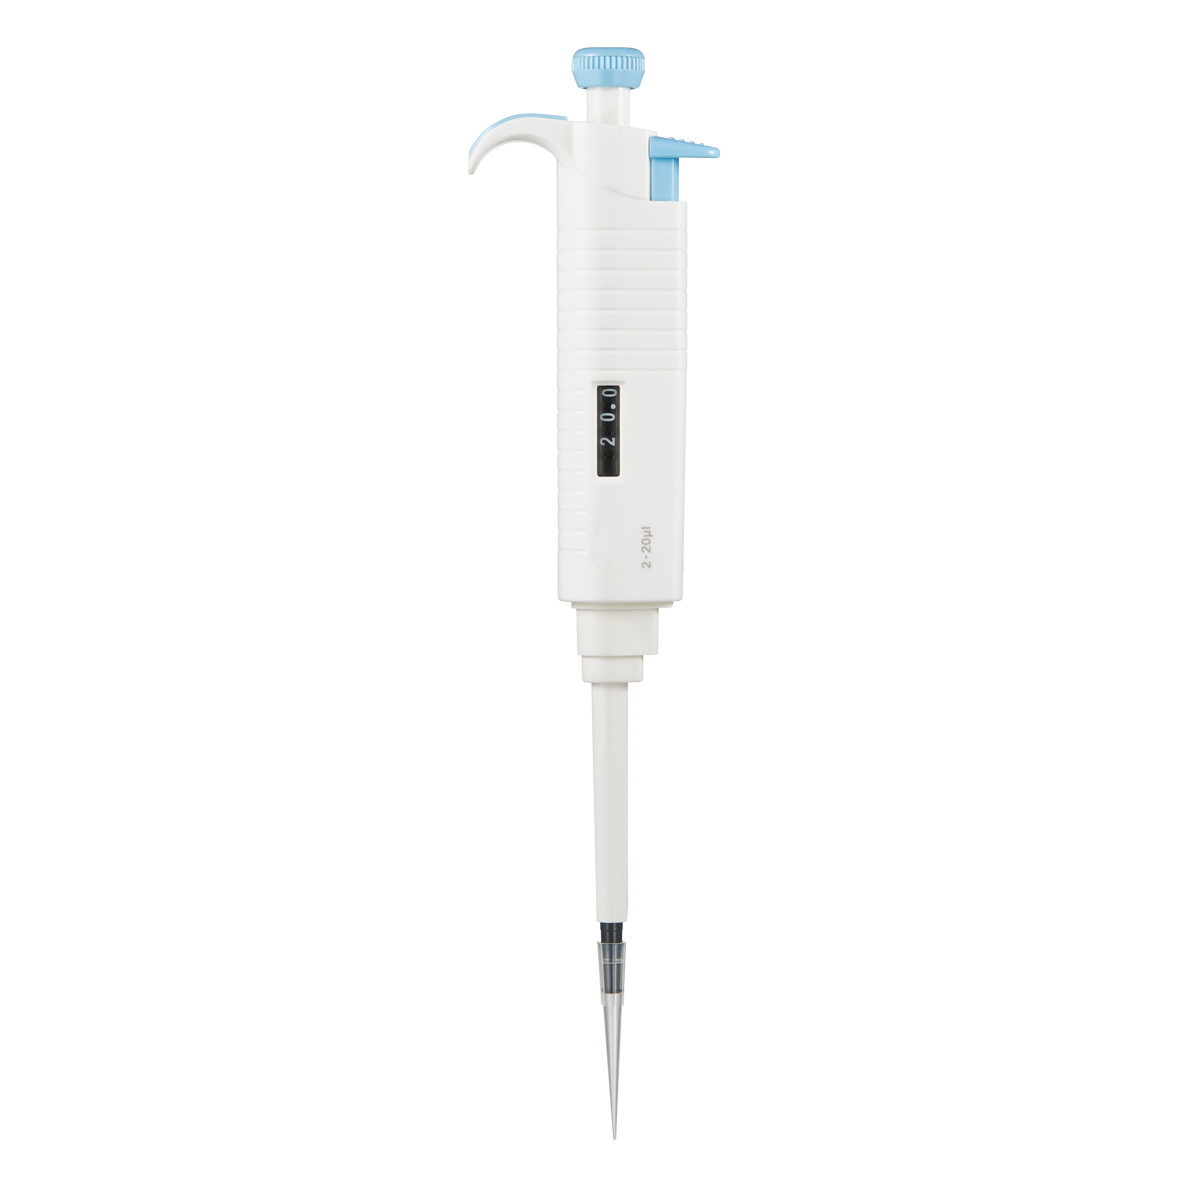 Microlitre Pipette 0 5 10 µl Fully Autoclavable W1611 Pipets And Micropipets 3b Scientific